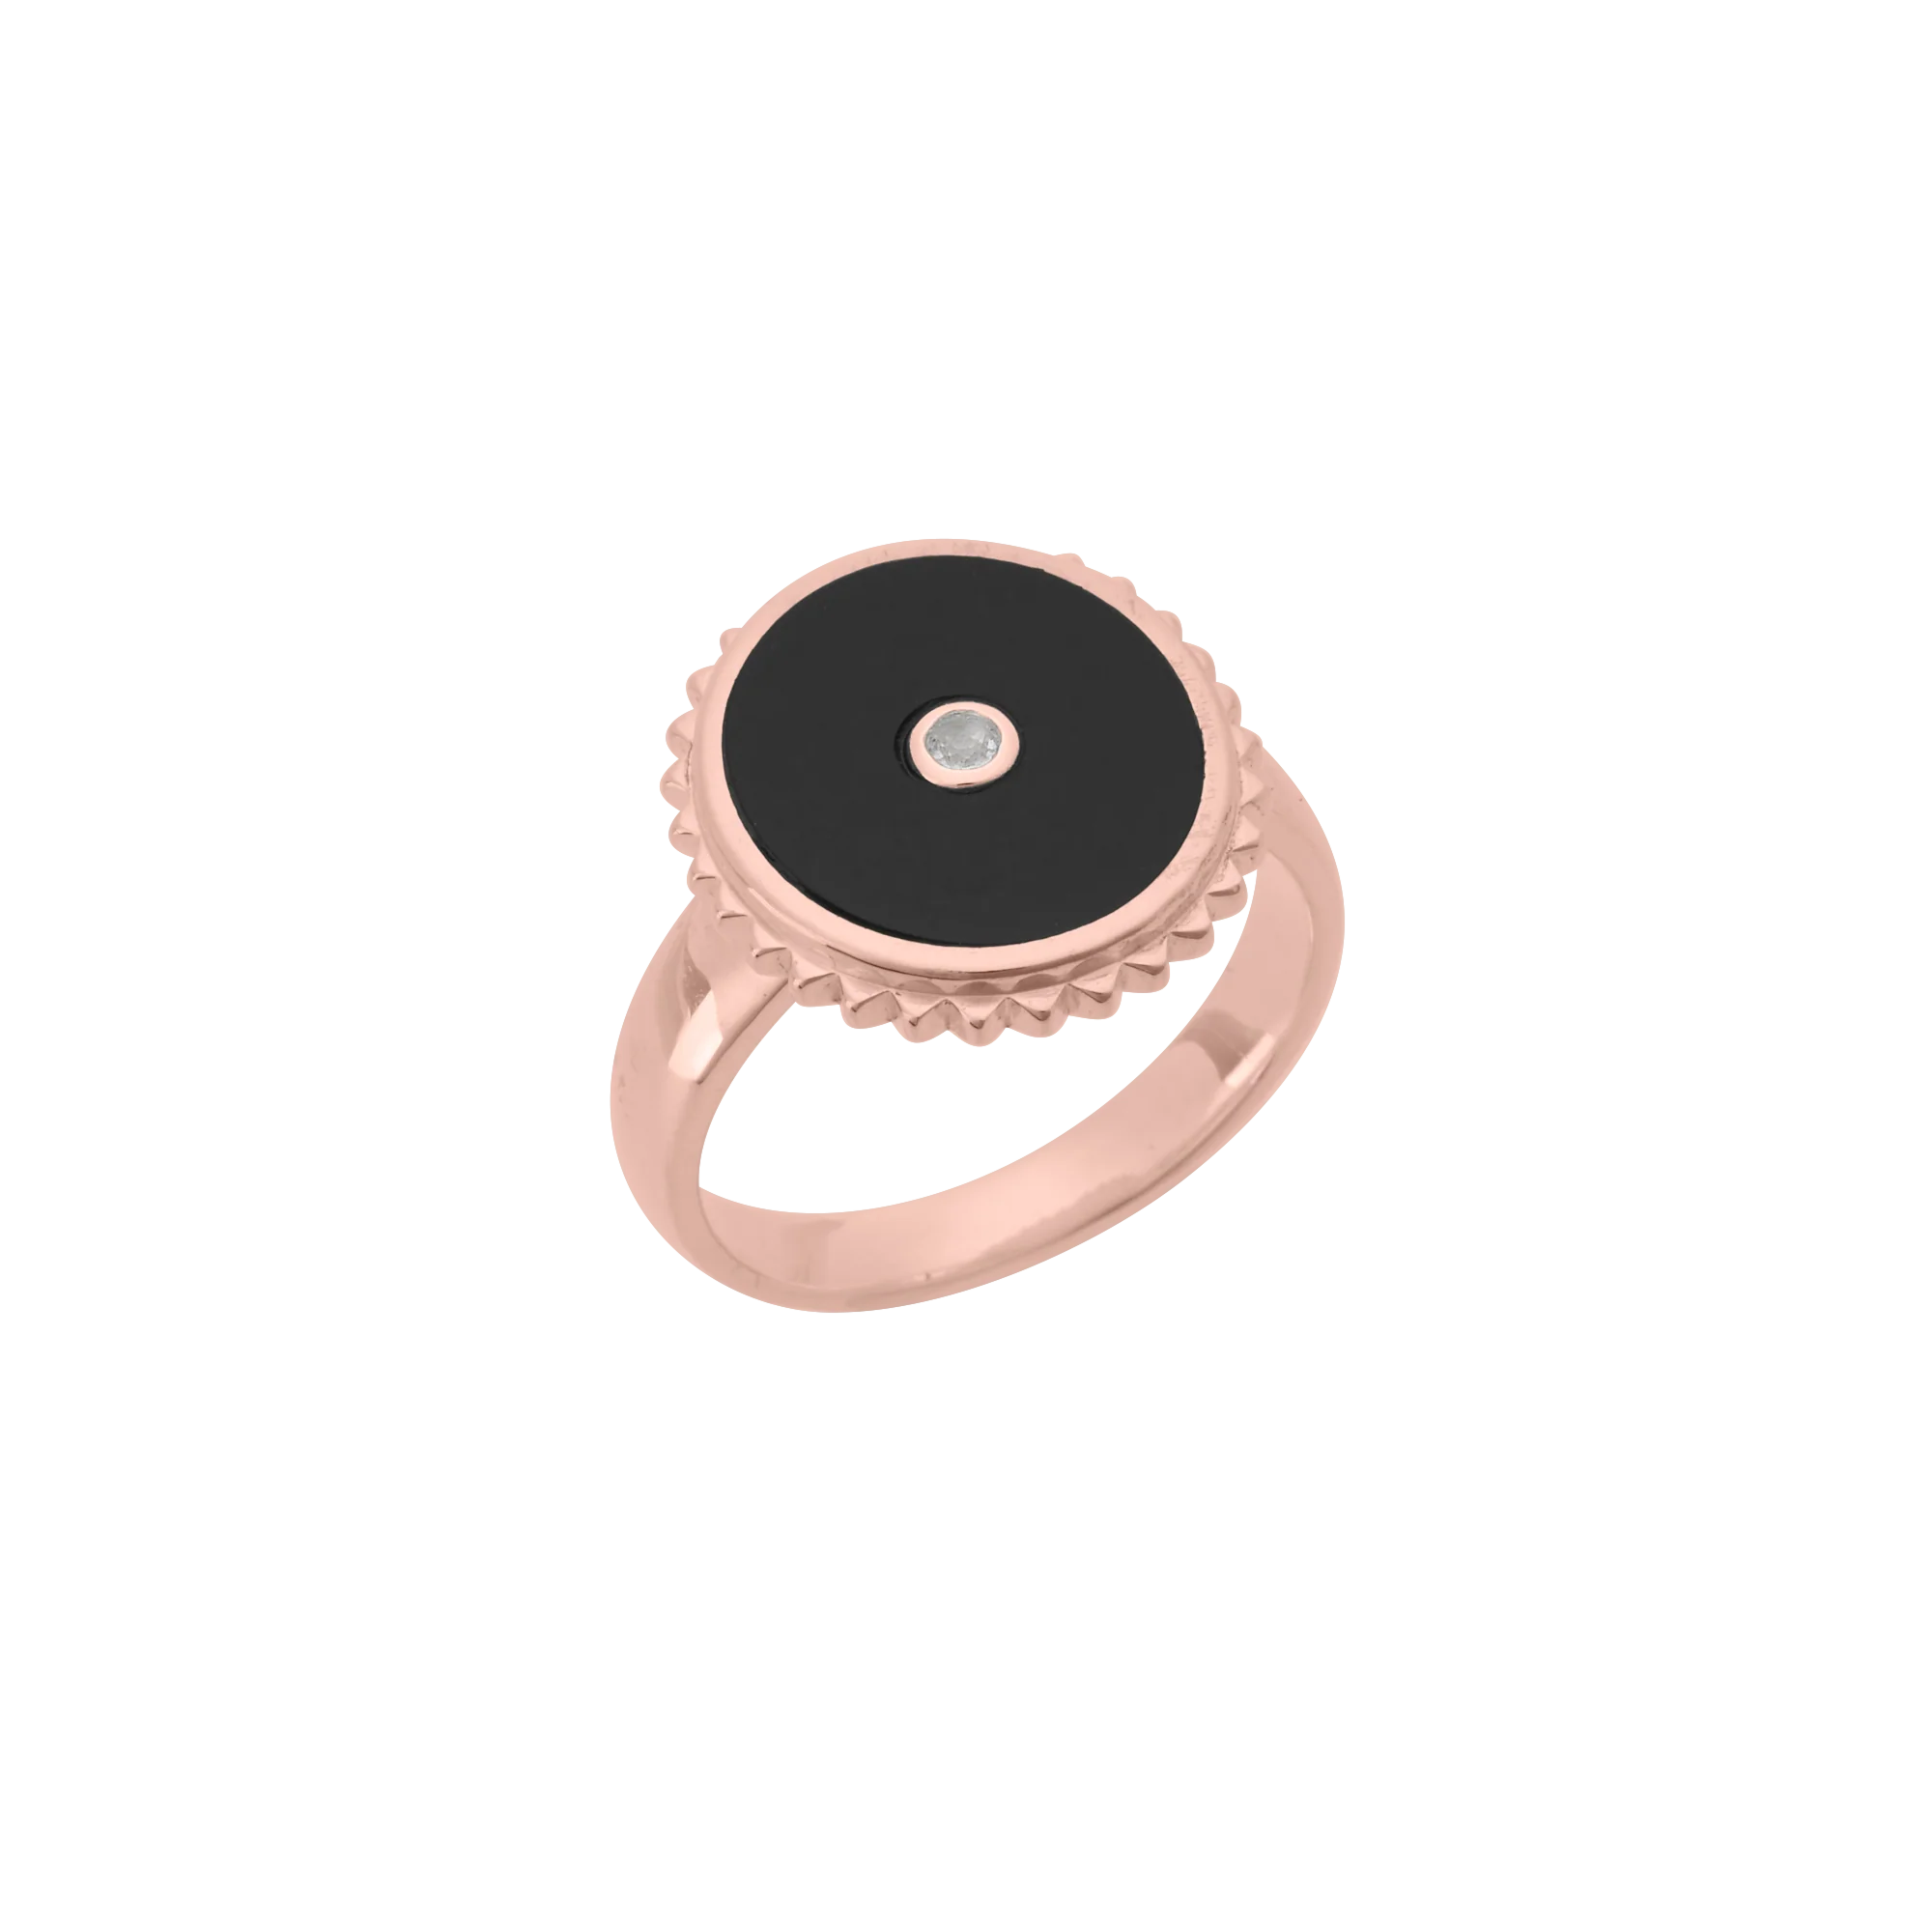 Murkani Halcyon Equilibrium Ring in Rose Gold